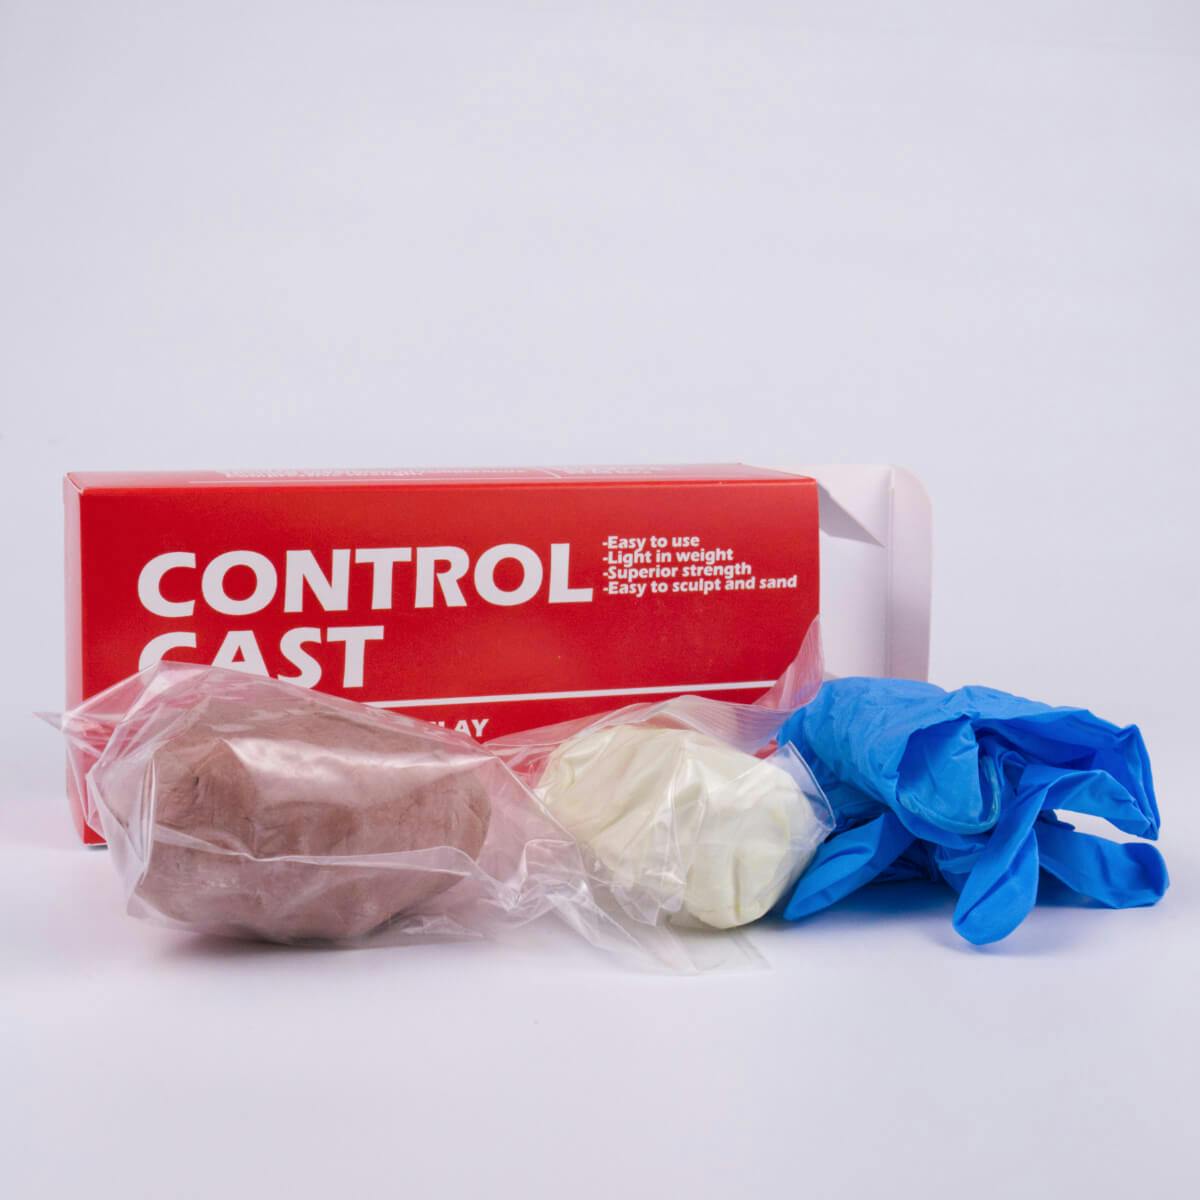 Epoxy clay packaging and content (rubber gloves and two parts)